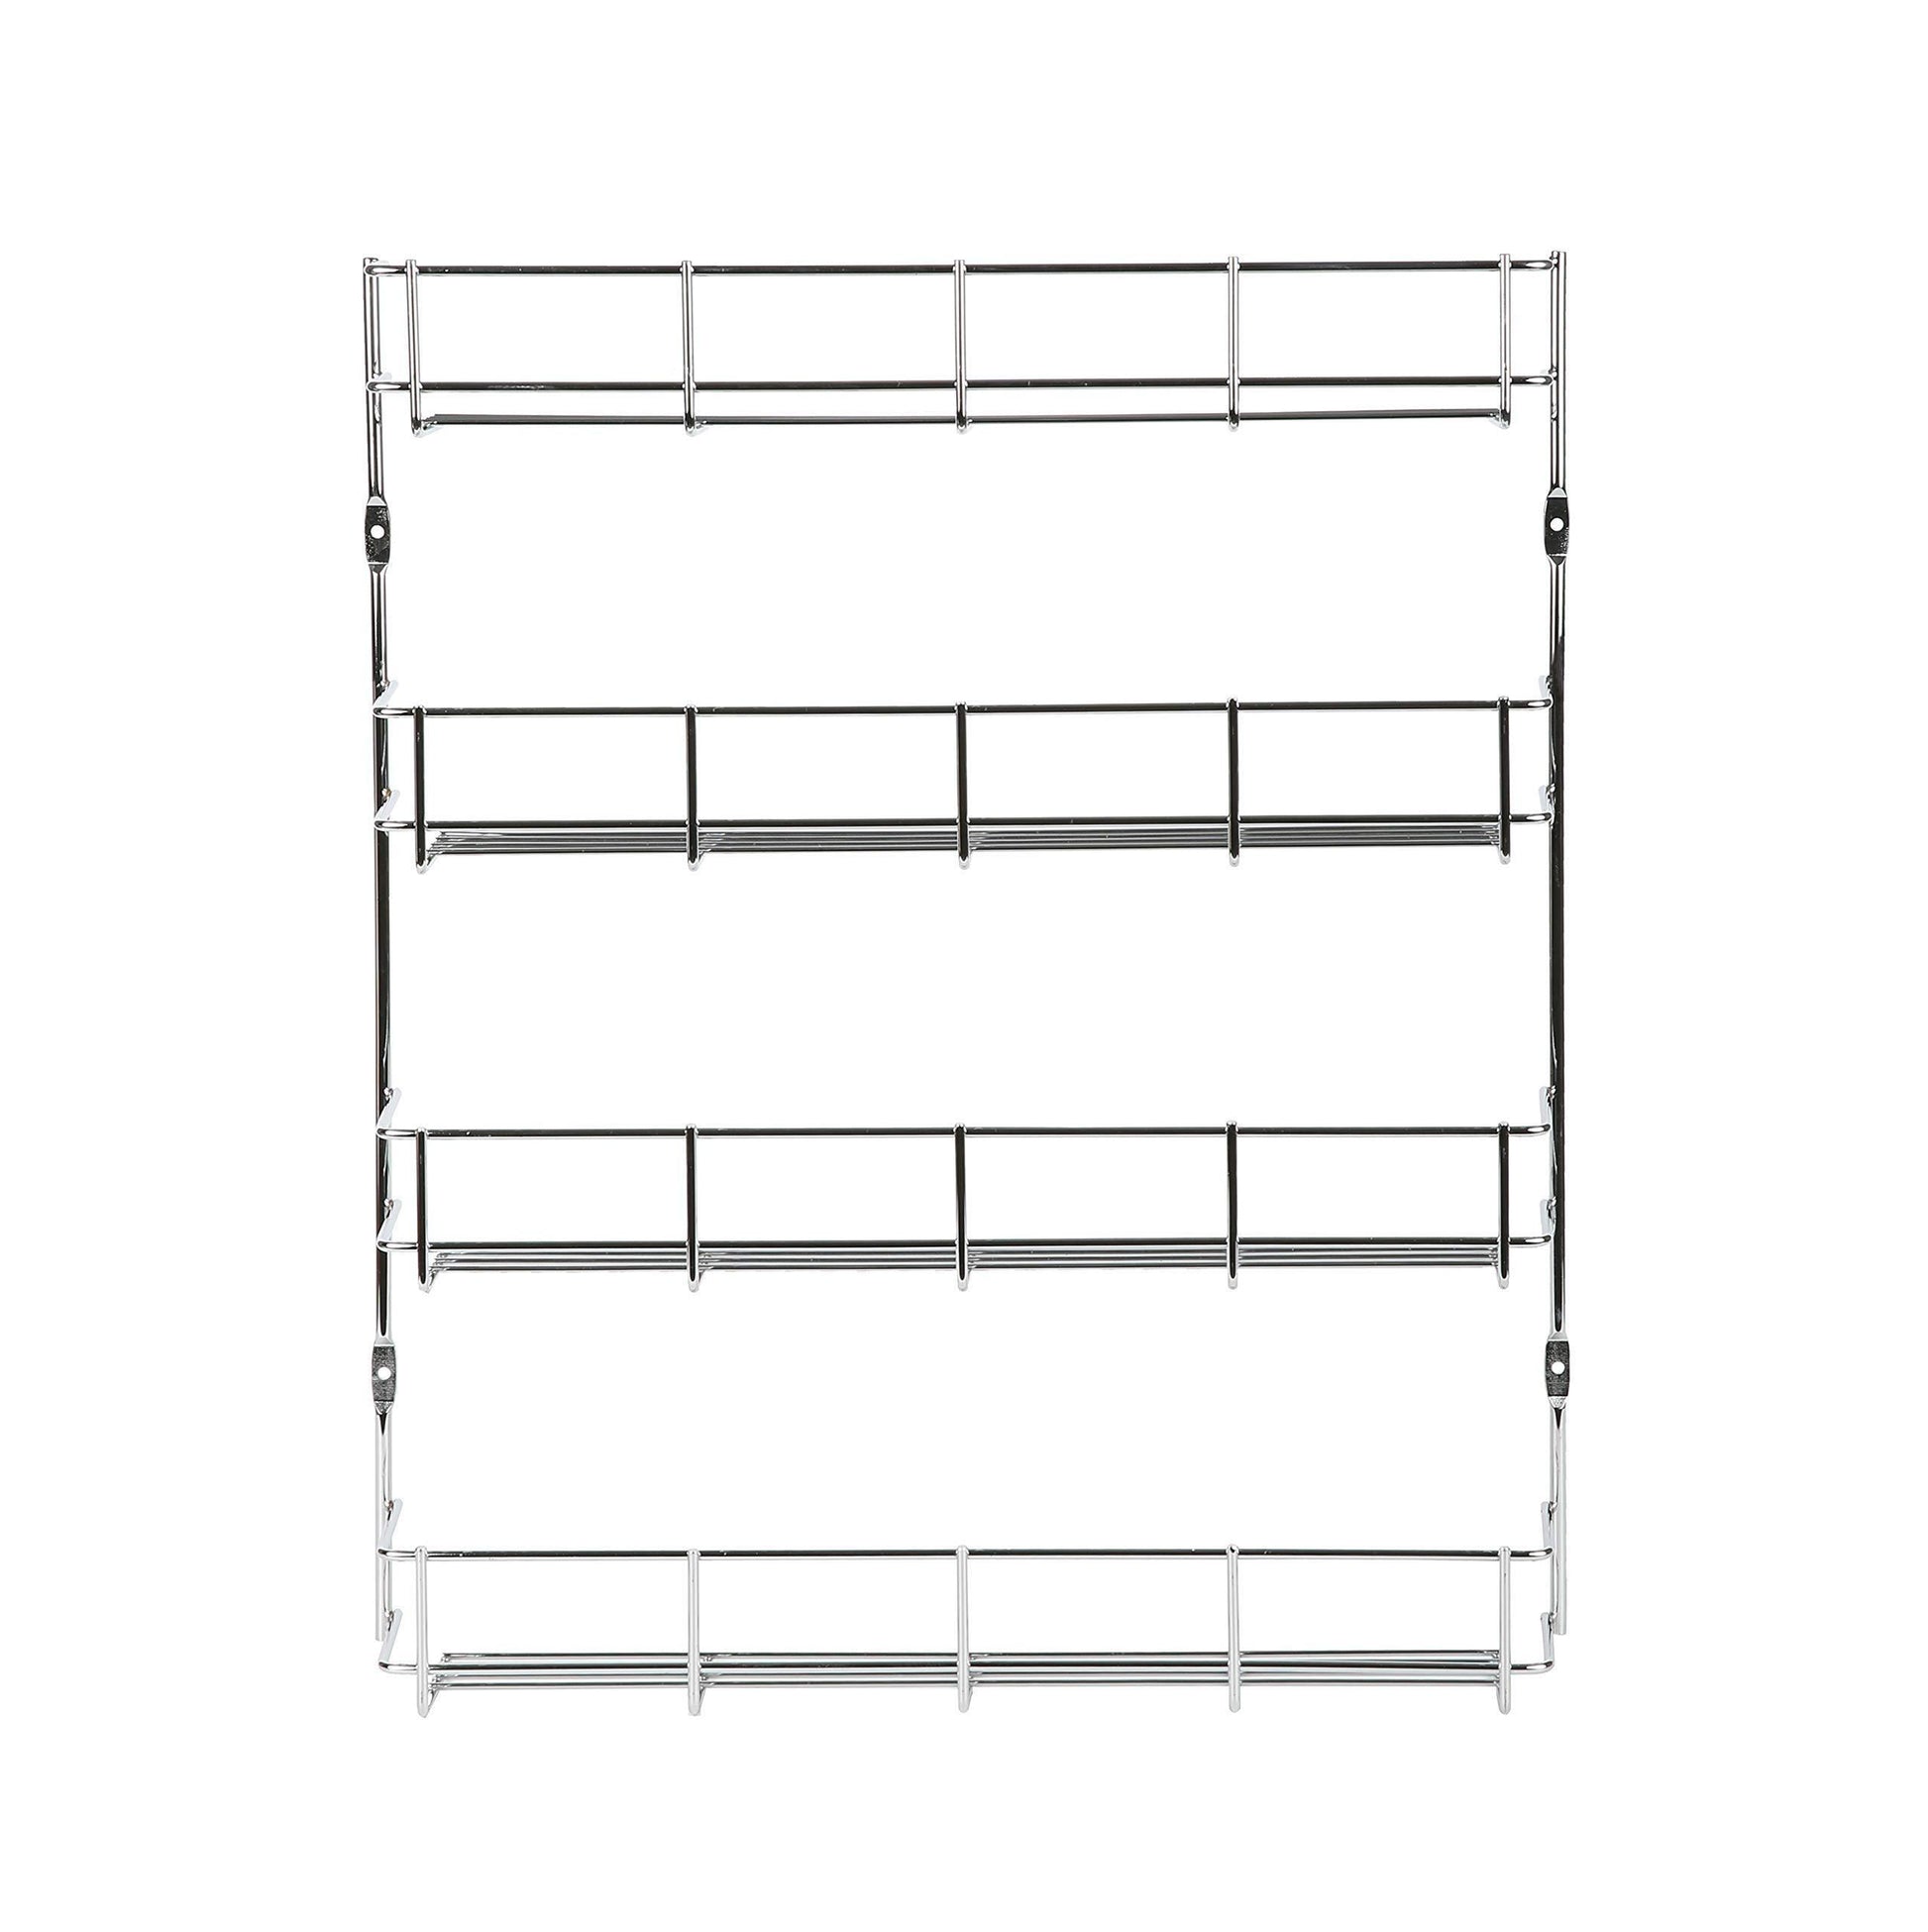 New exzact exerz herb and spice rack 4 tiers kitchen shelf organiser for jars perfect space saving and storage wall mountable or cupboard door fitting fixings included in the package exsr004 4